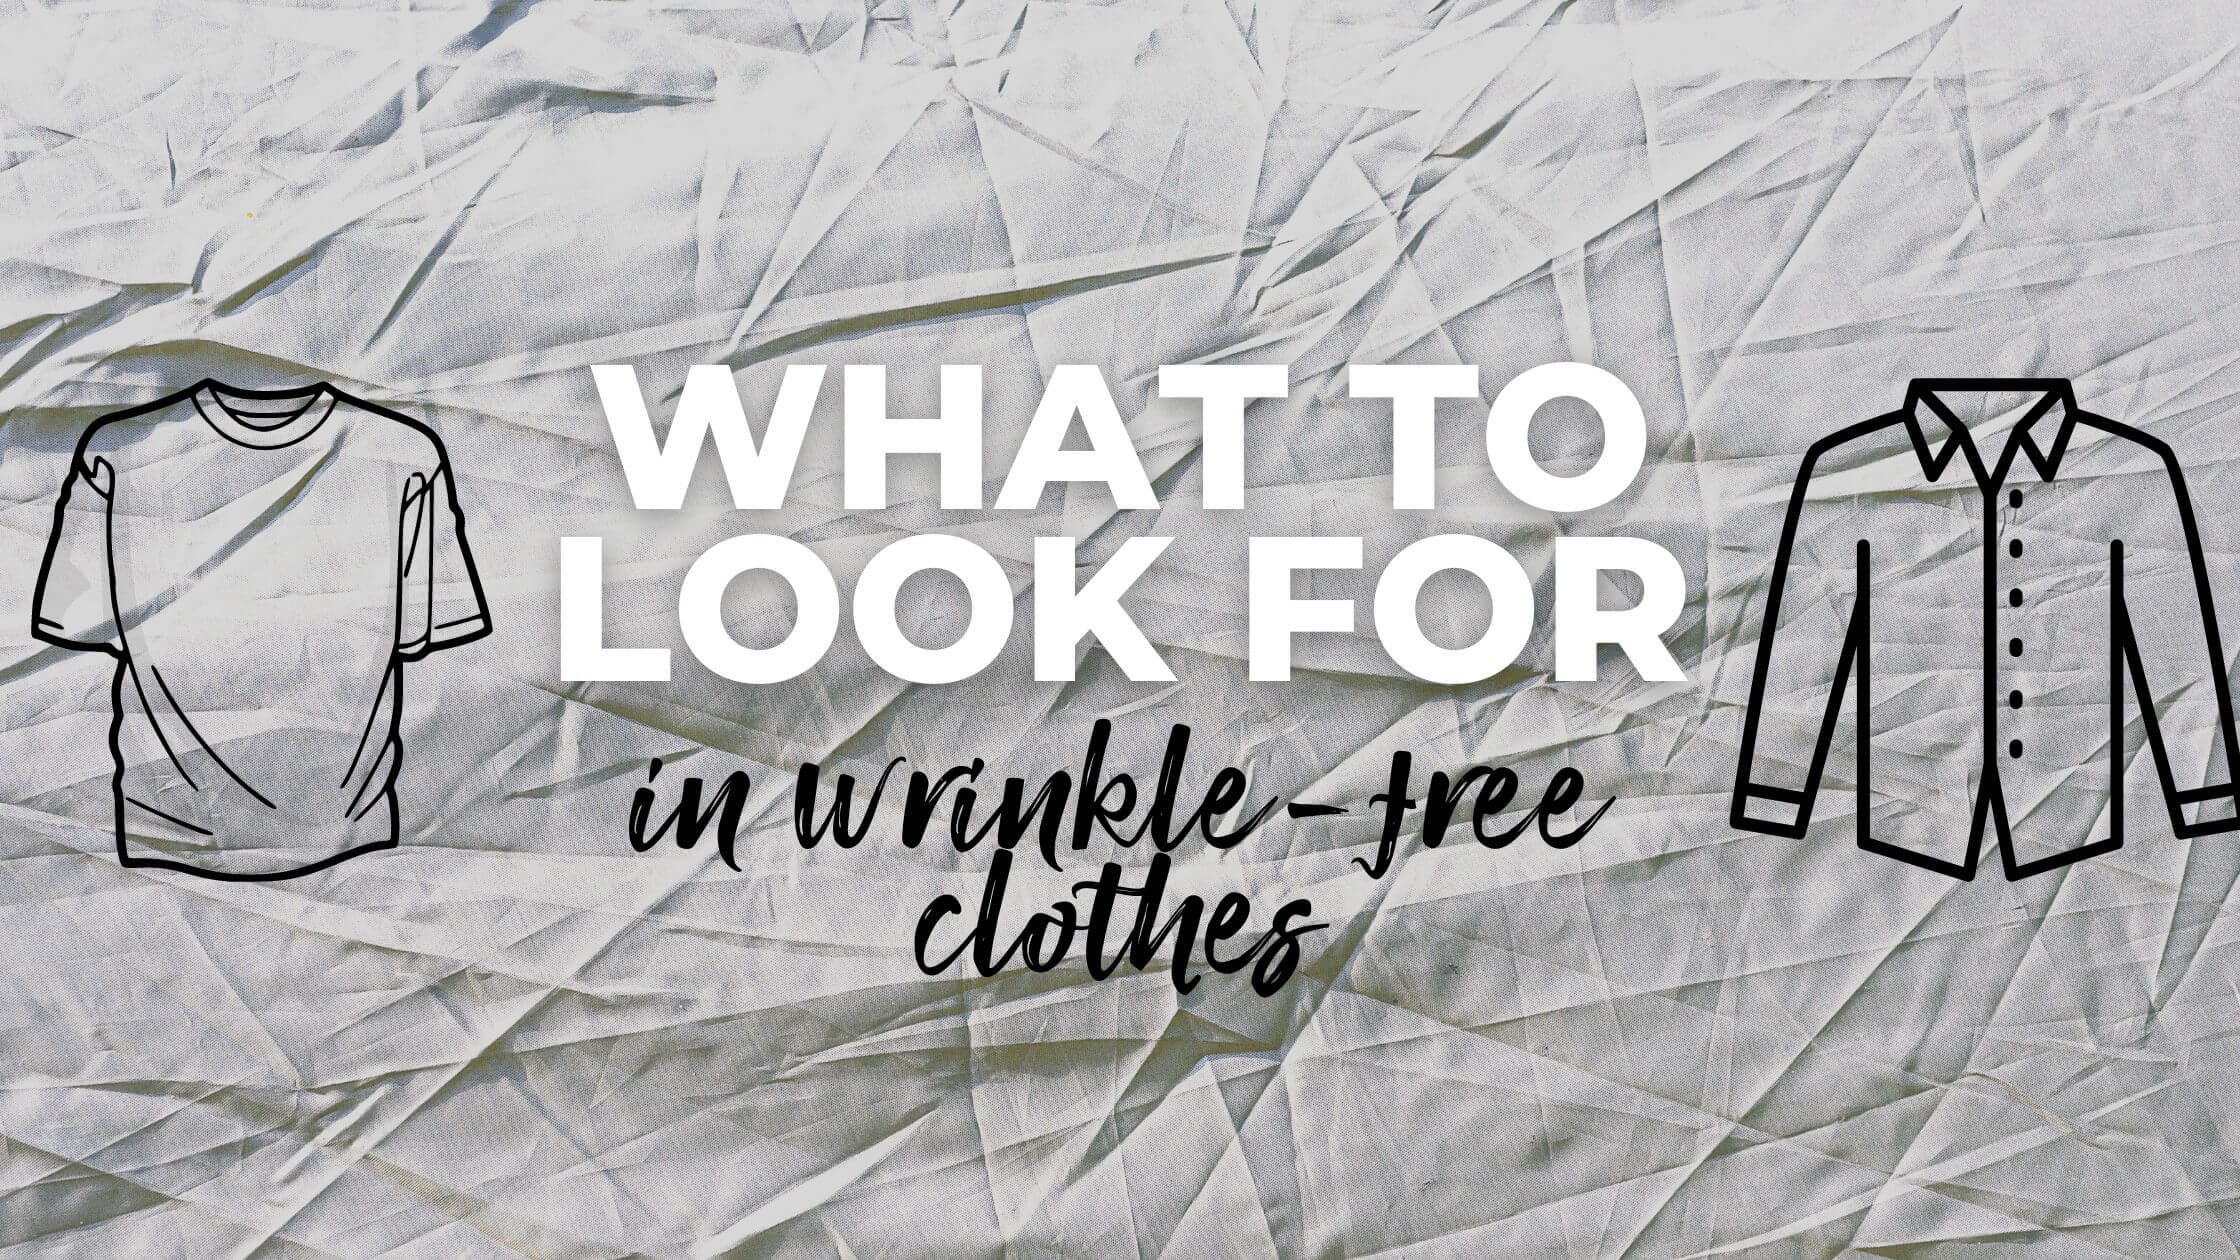 what to look for in wrinkle-free clothes